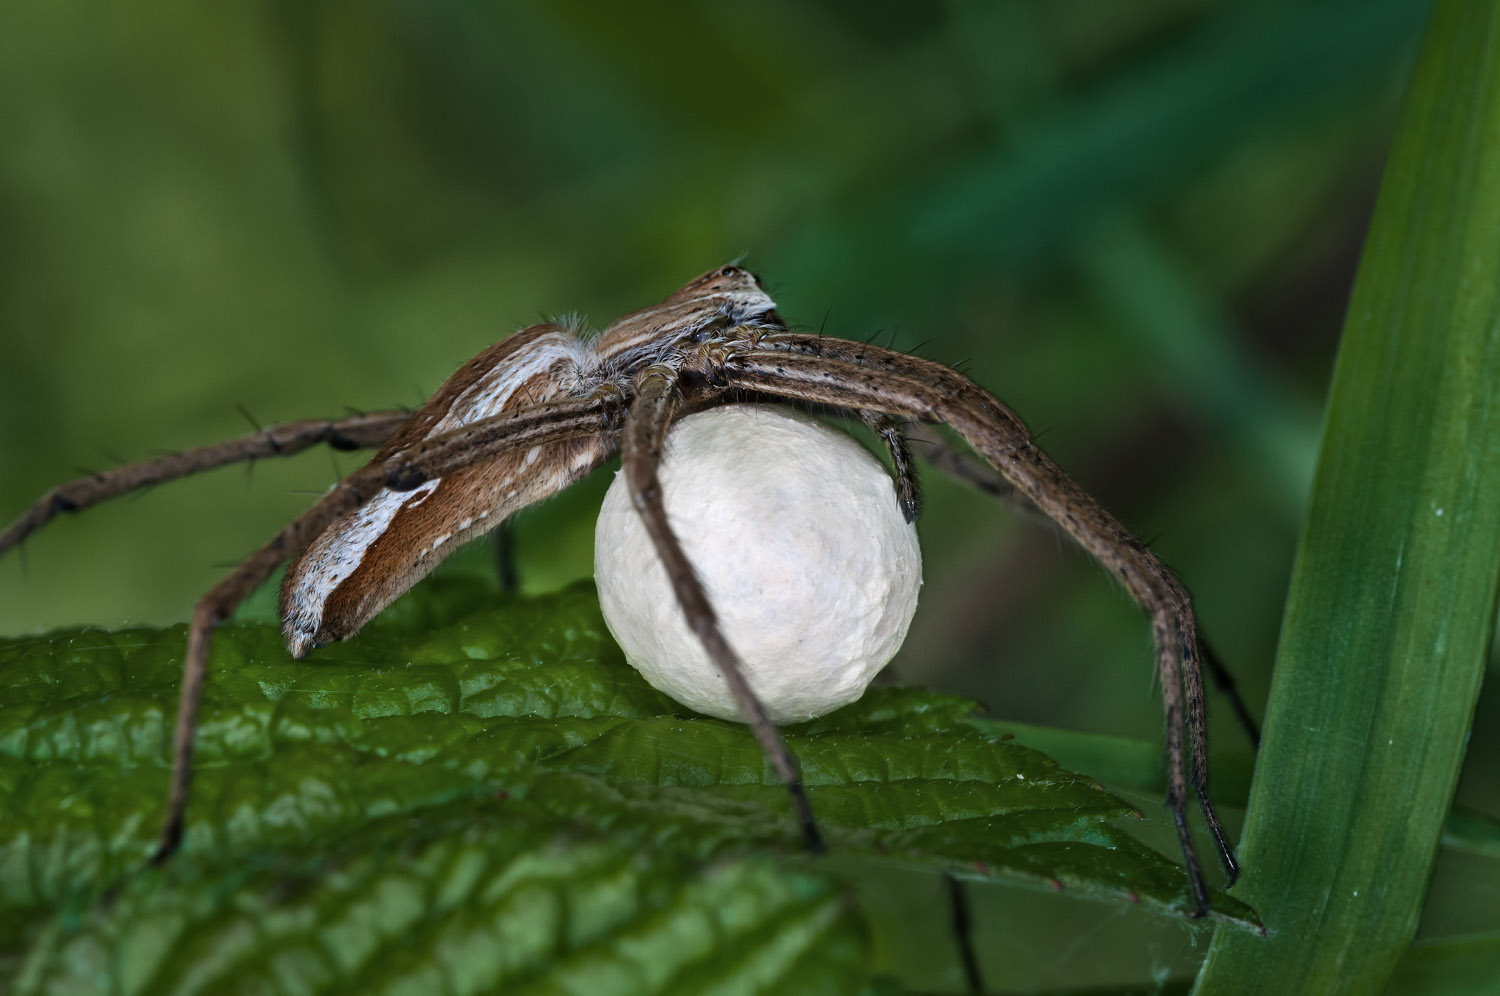 Wolf-spider with its eggs sac